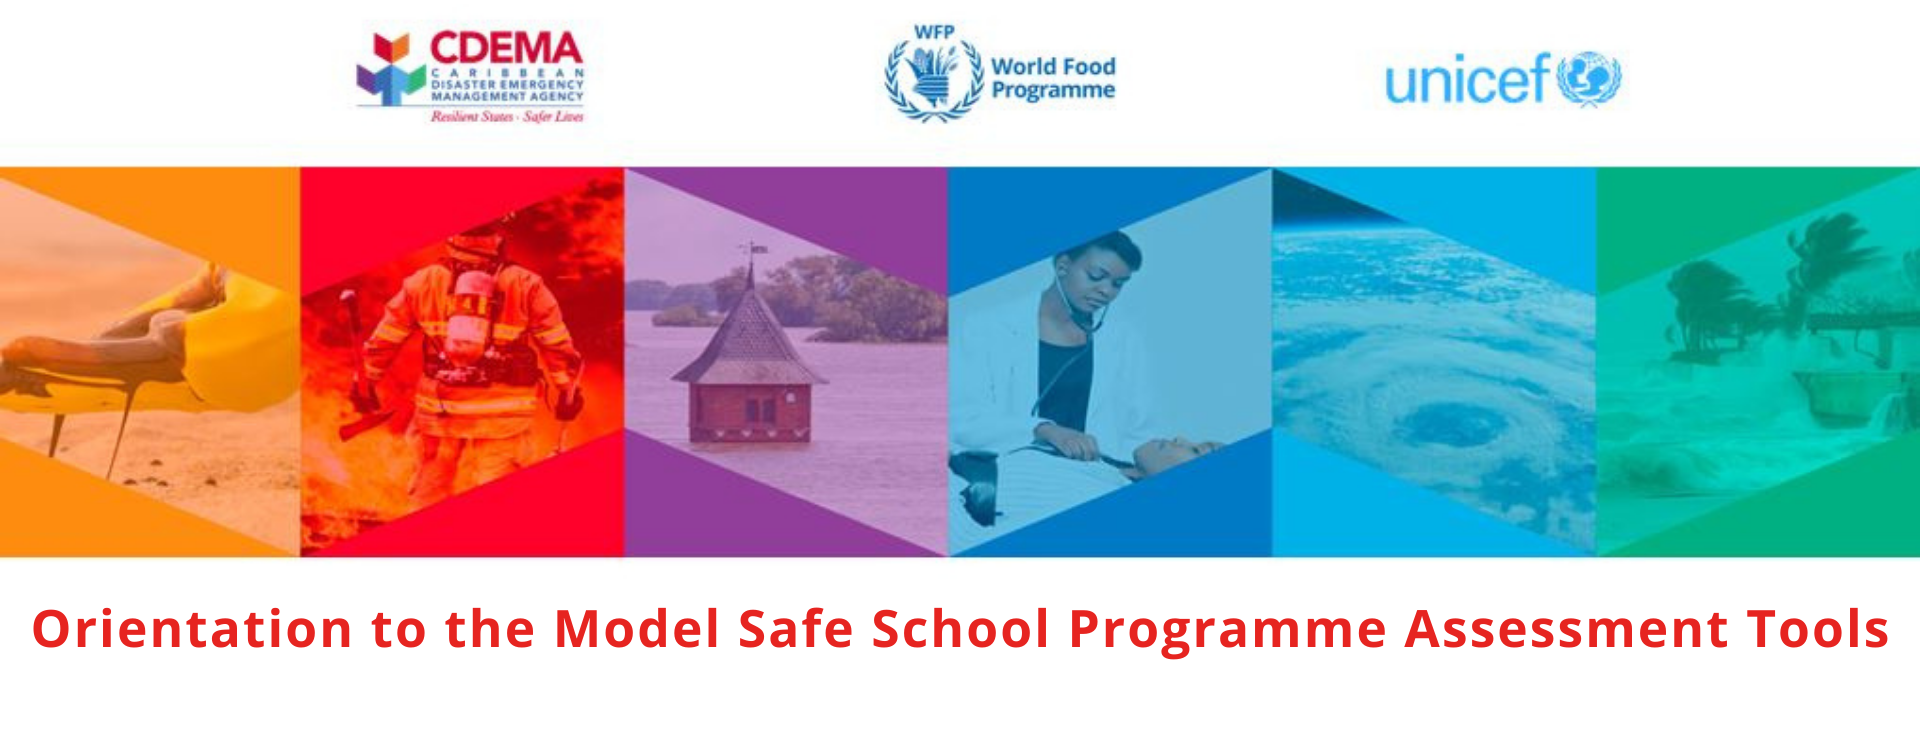 Orientation to the Model Safe School Programme Assessment Tools